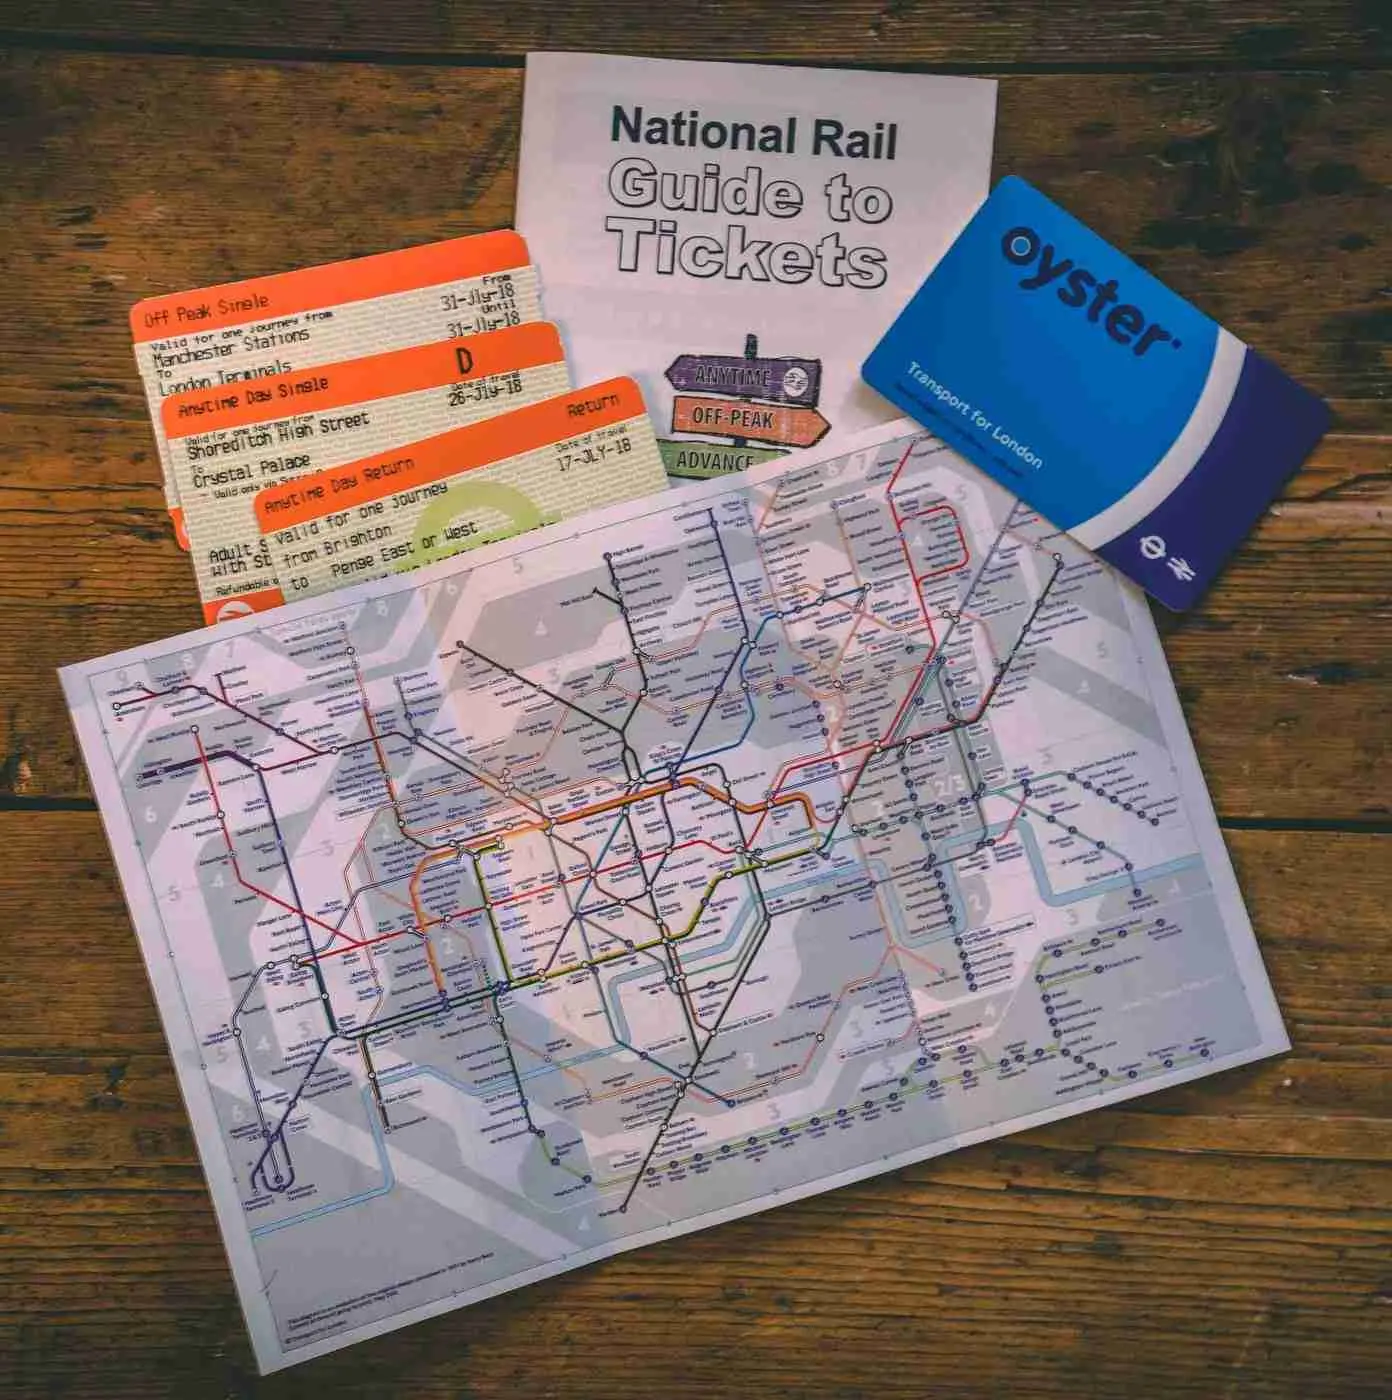 In the top left you have the orange credit card style National Rail ticket and in the top right you have the blue Oyster Card.